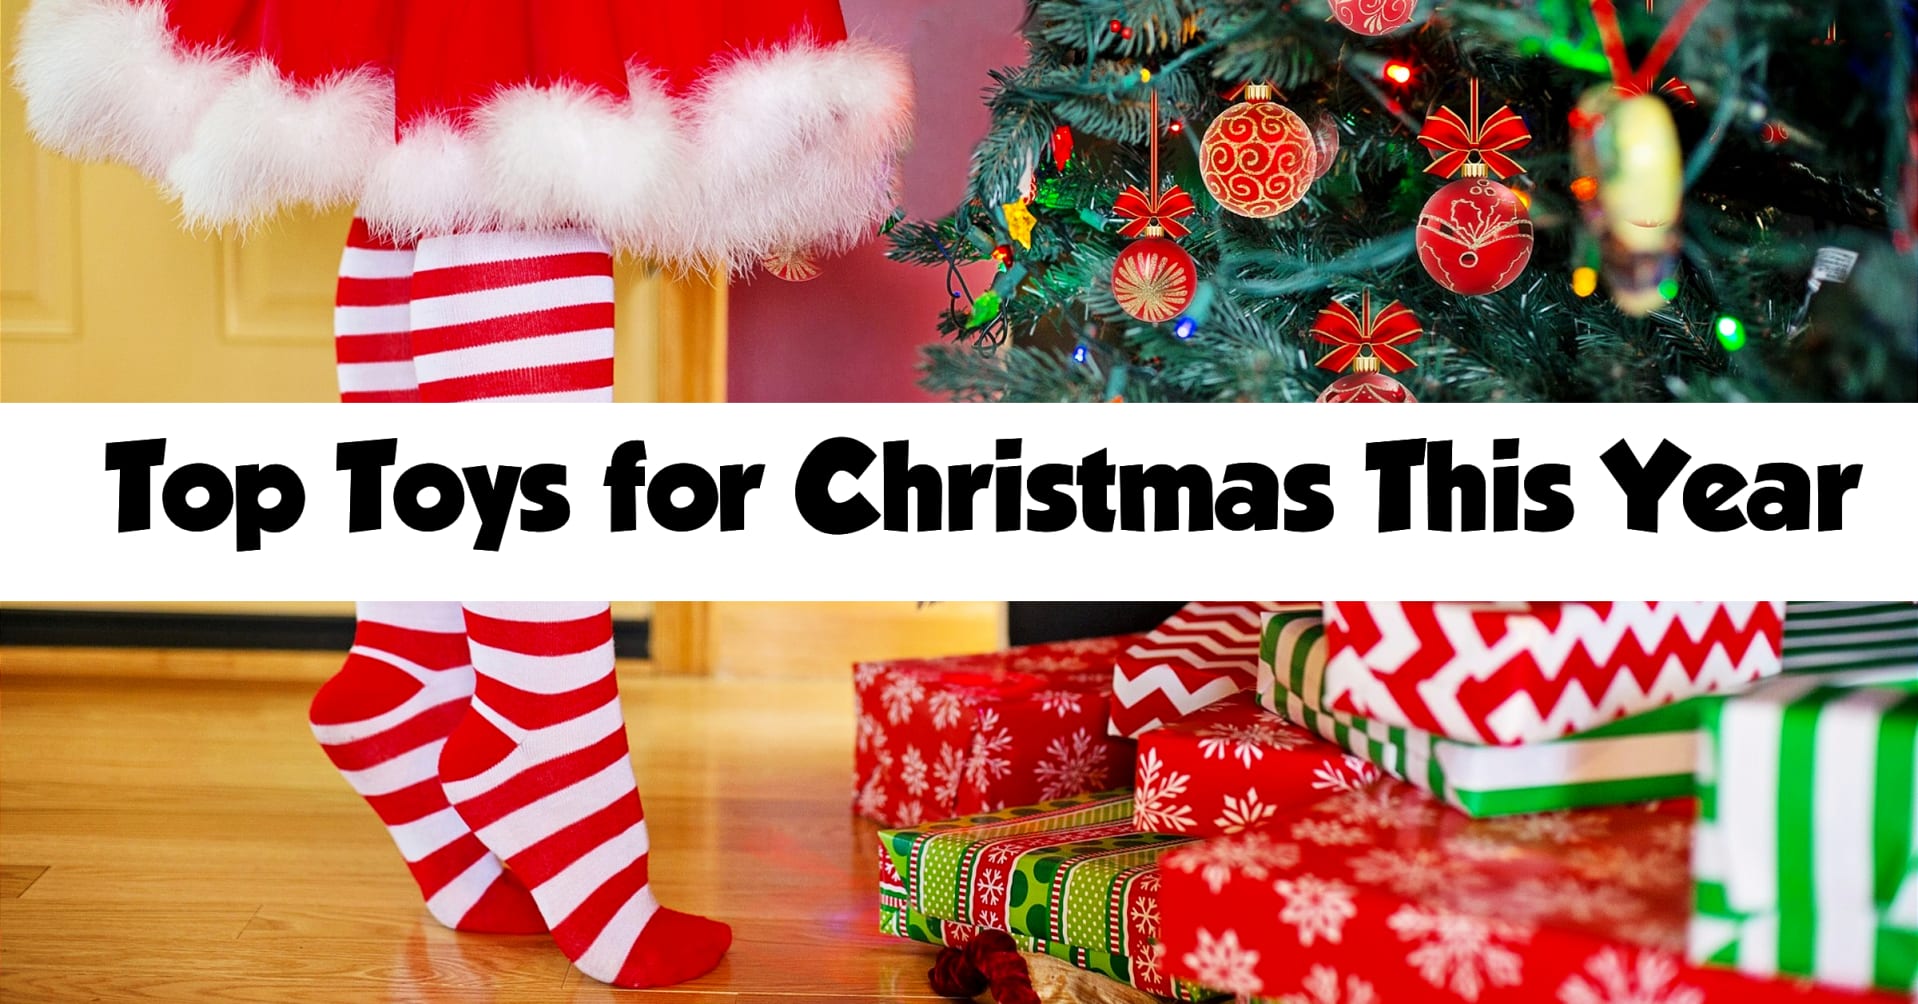 Top toys for Christmas this year